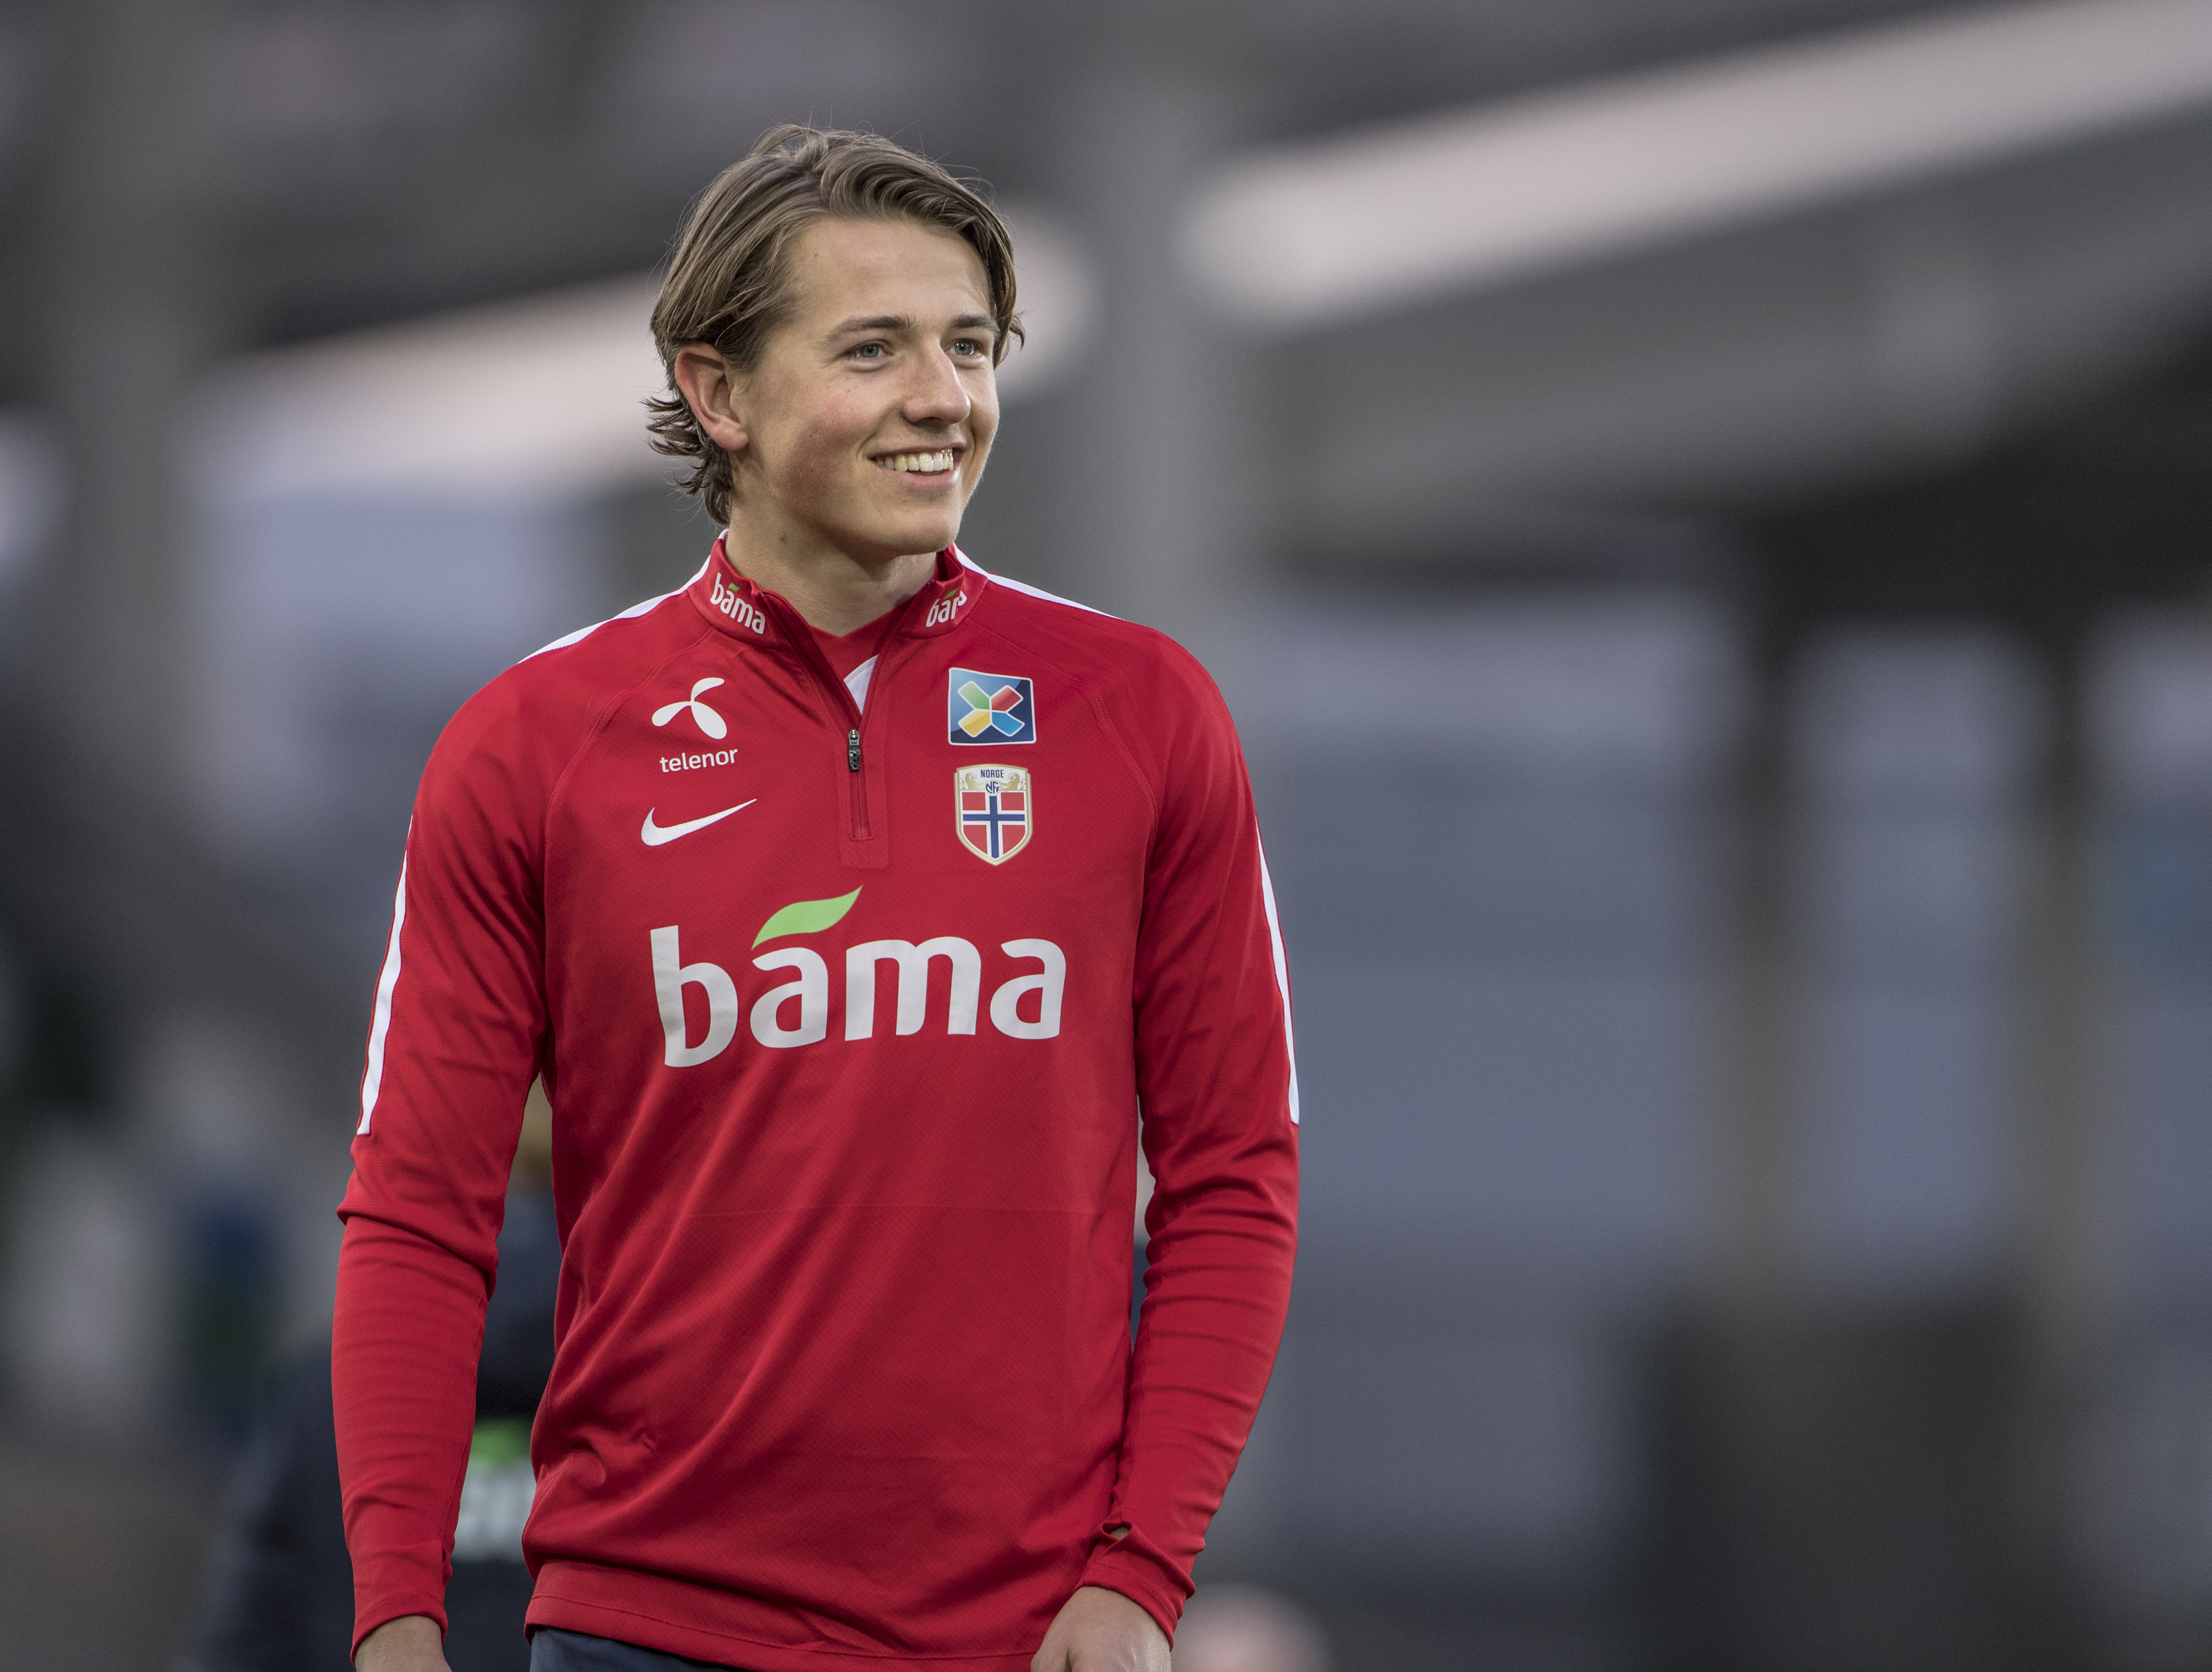 BELFAST, NORTHERN IRELAND - MARCH 26: Sander Berge of Norway during the FIFA 2018 World Cup Qualifier between Northern Ireland and Norway at Windsor Park on March 26, 2017 in Belfast, Northern Ireland. (Photo by Trond Tandberg/Getty Images)